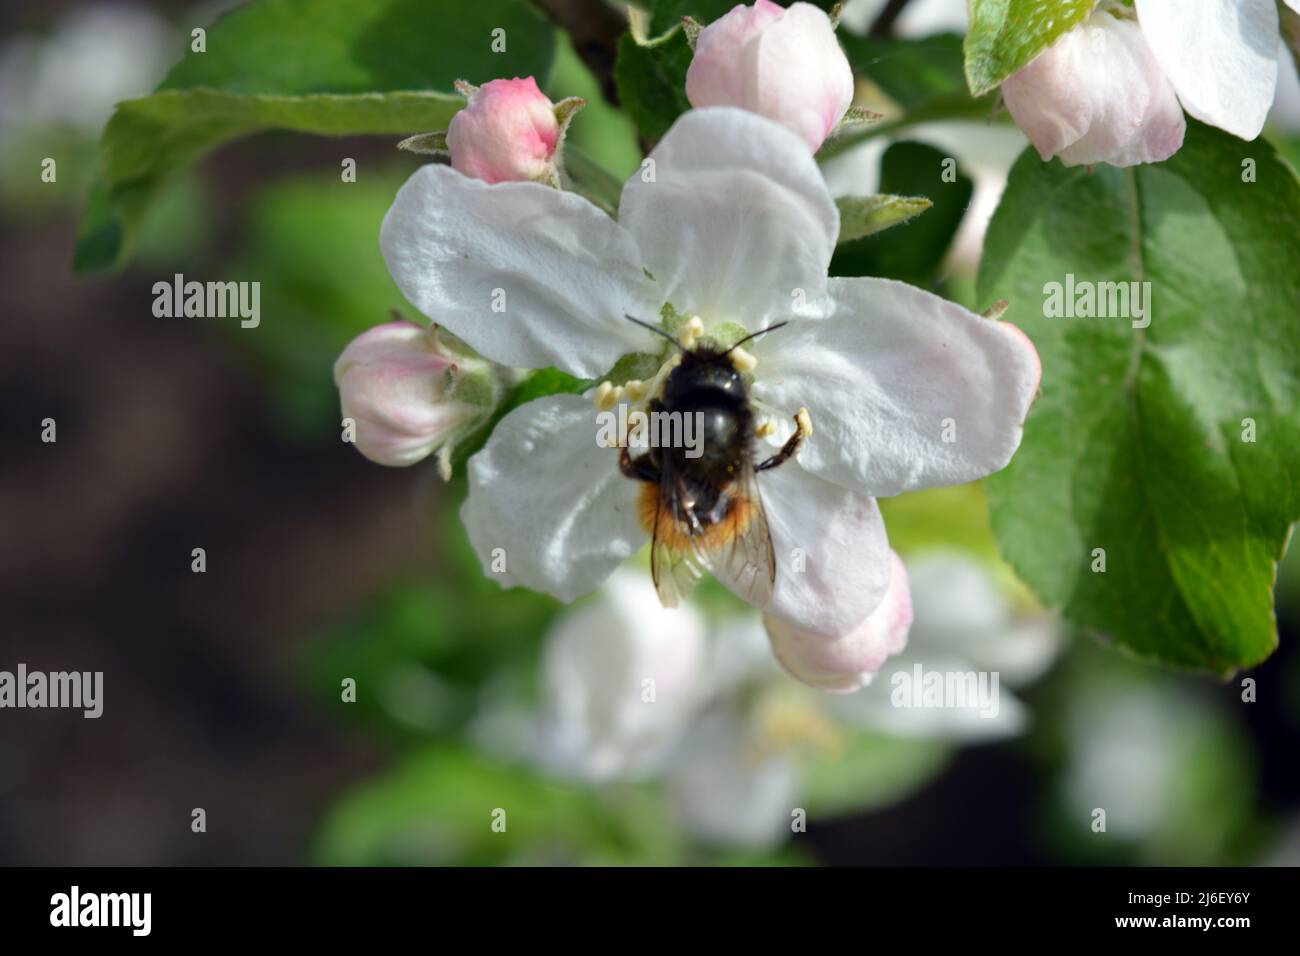 Beautiful large white buds of a blooming apple tree with a large black and yellow beetle, illuminated by the bright rays of the sun. Stock Photo